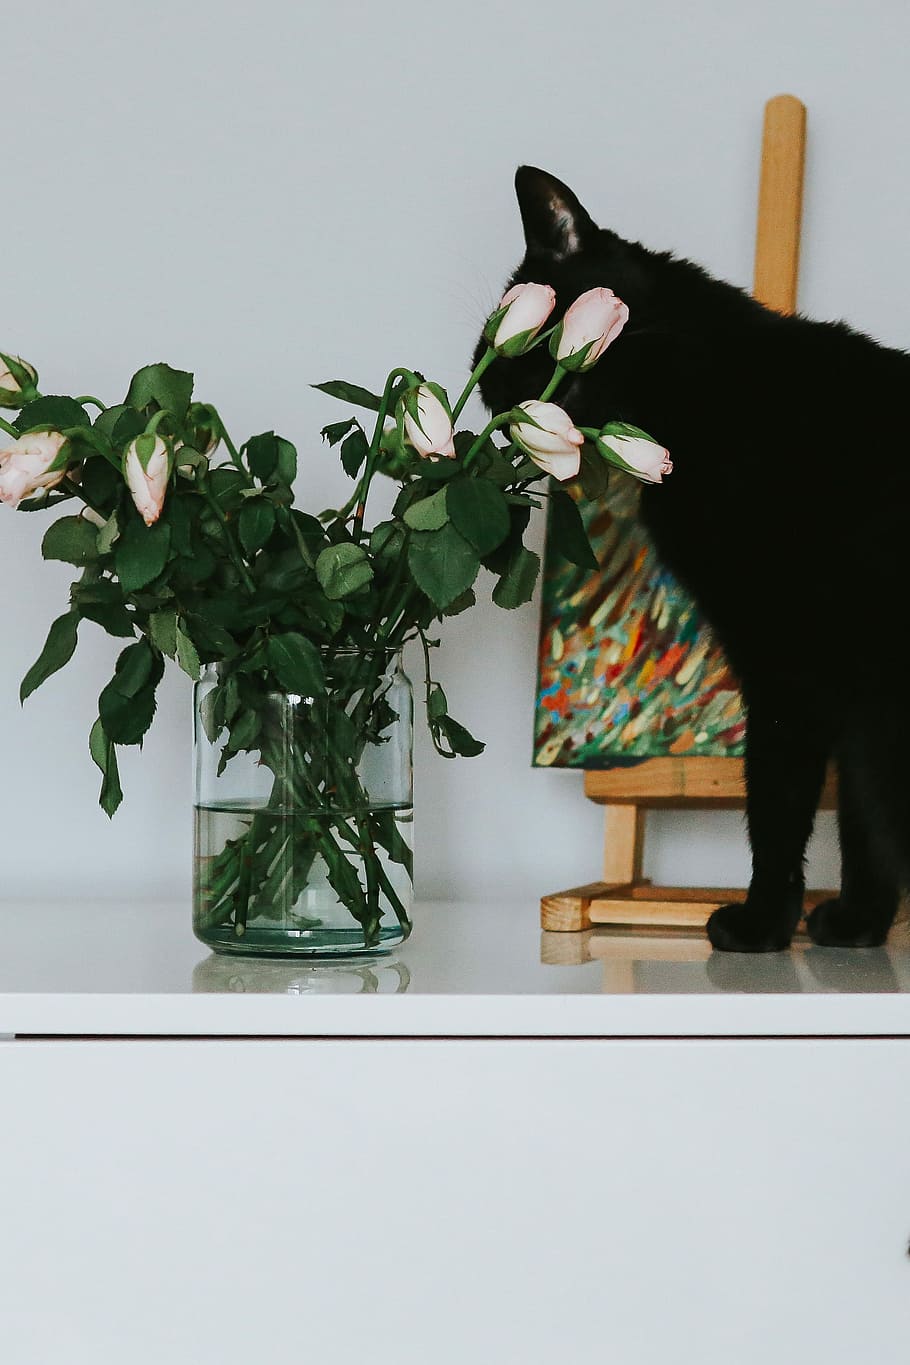 Black cat with flowers and a painting, roses, pet, animal, art